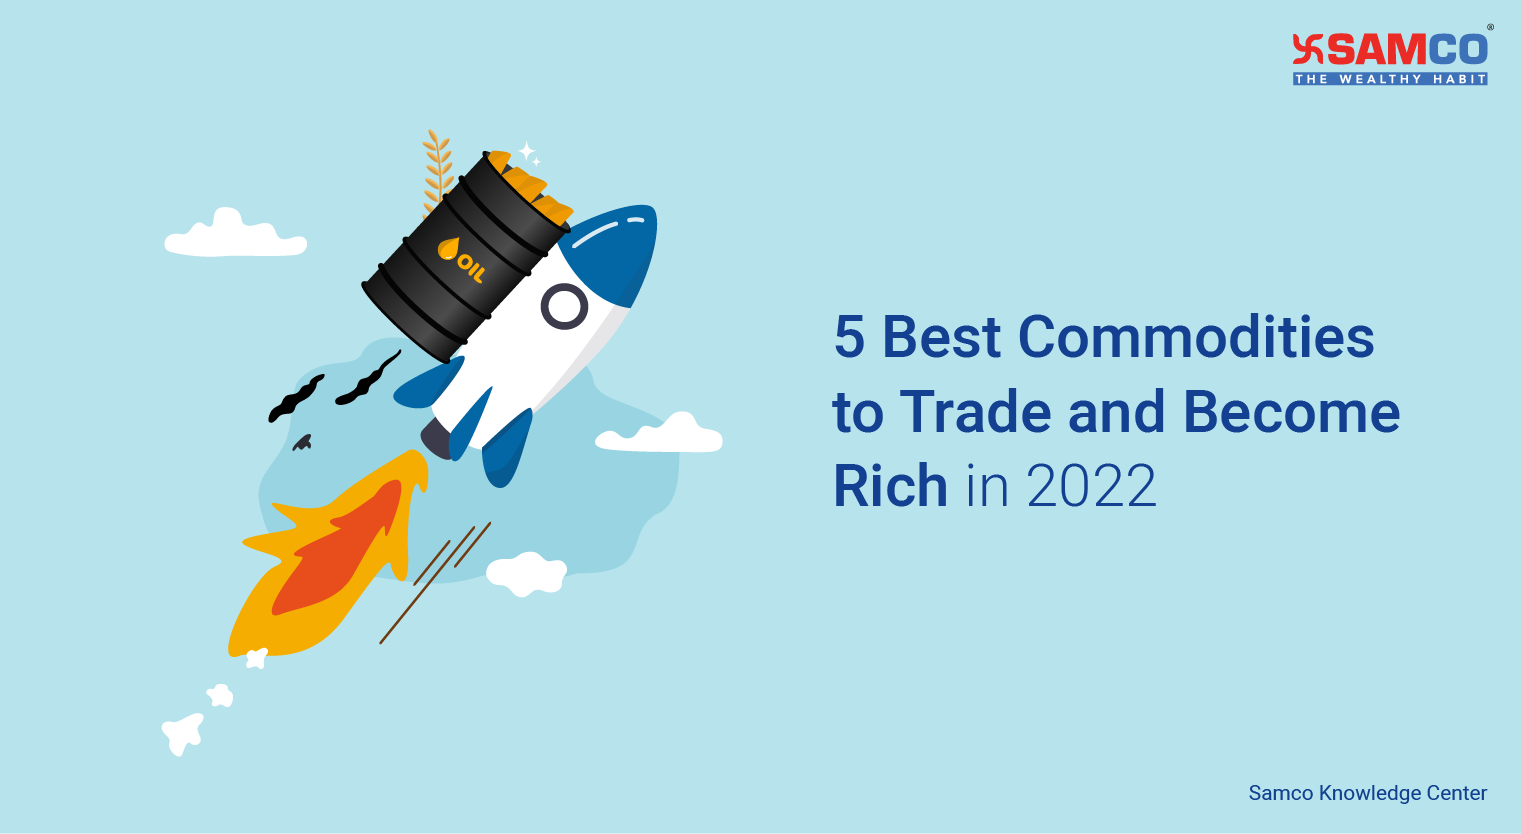 5 Best Commodities to Trade and Become Rich in 2022